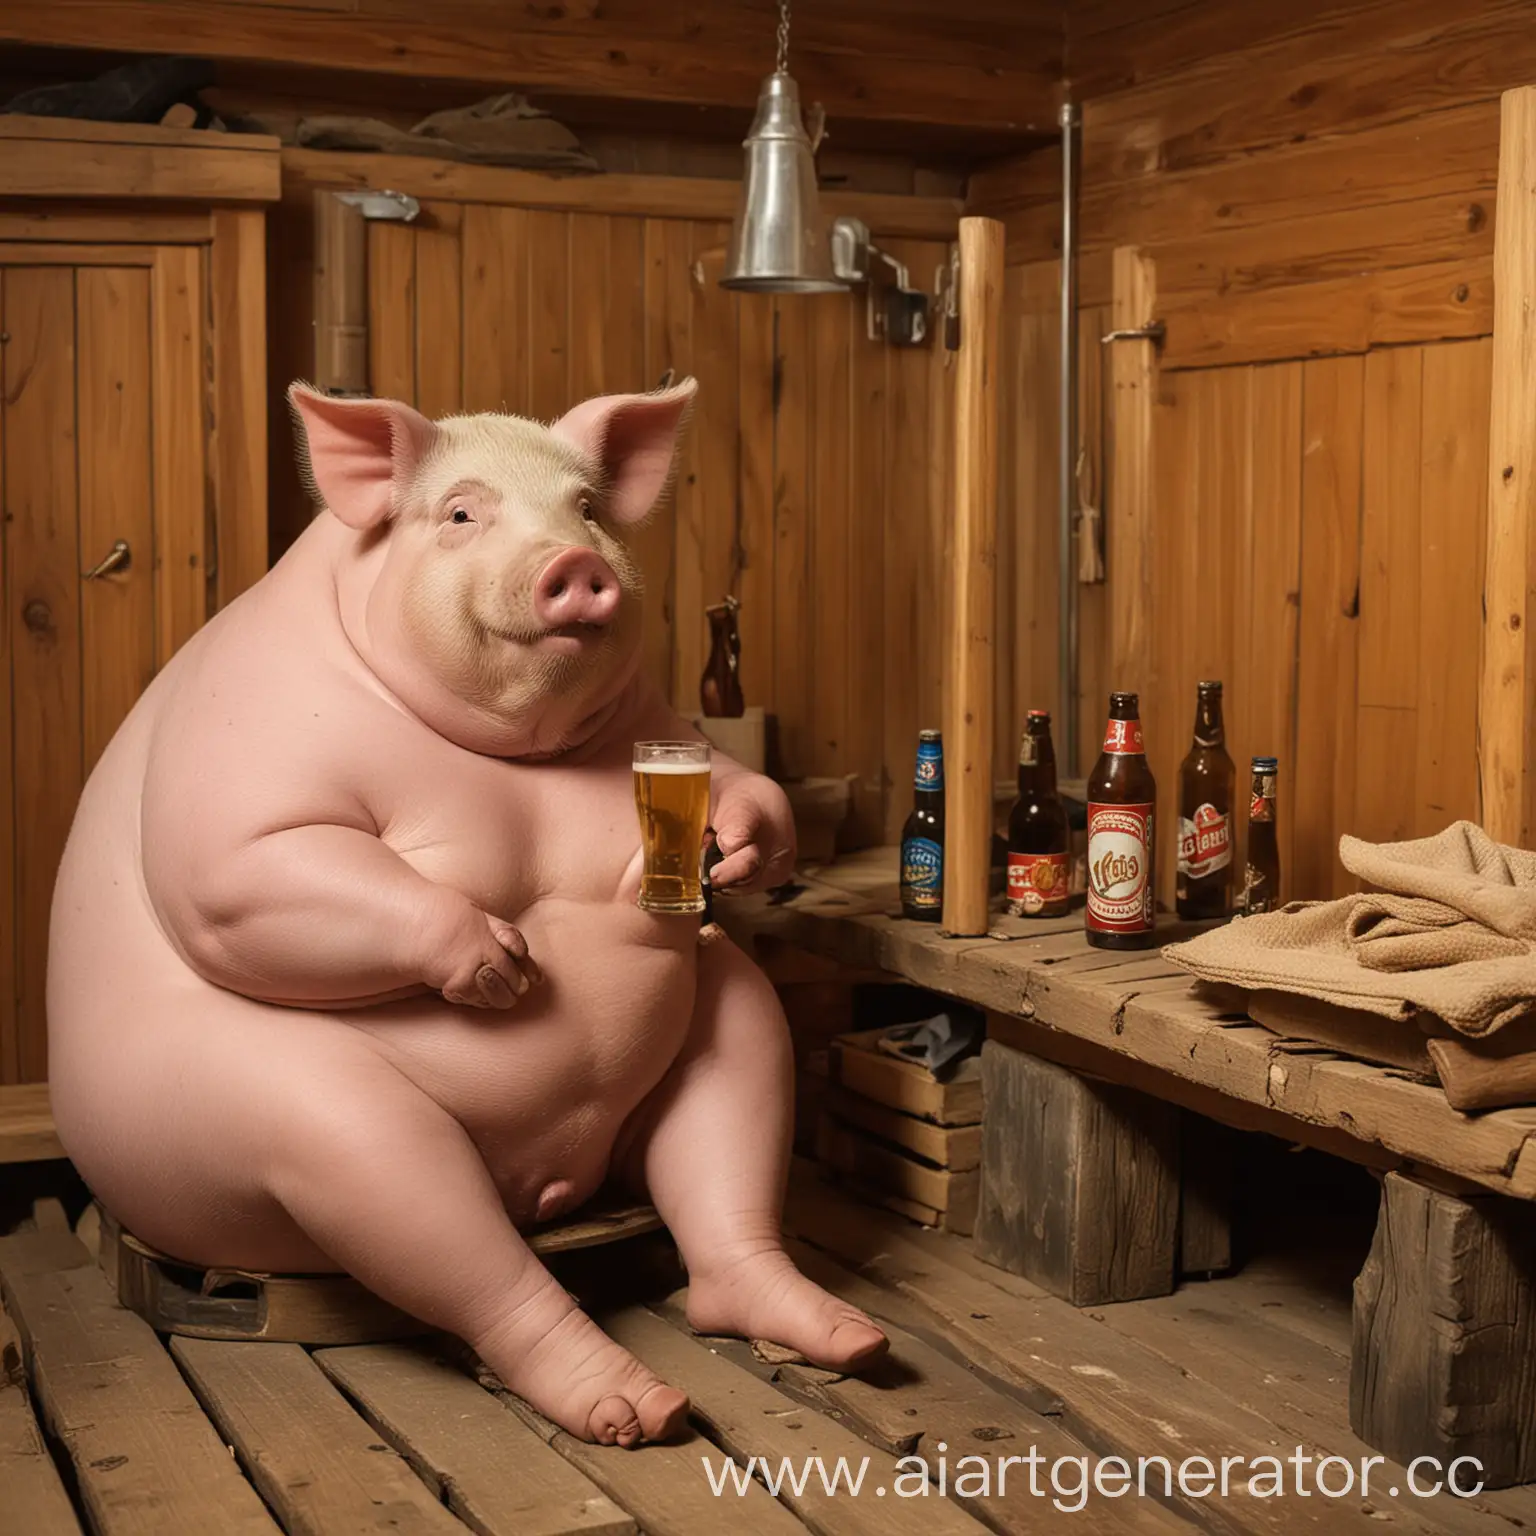 Chilled-Pig-in-Sauna-Enjoying-a-Beer-with-a-Man